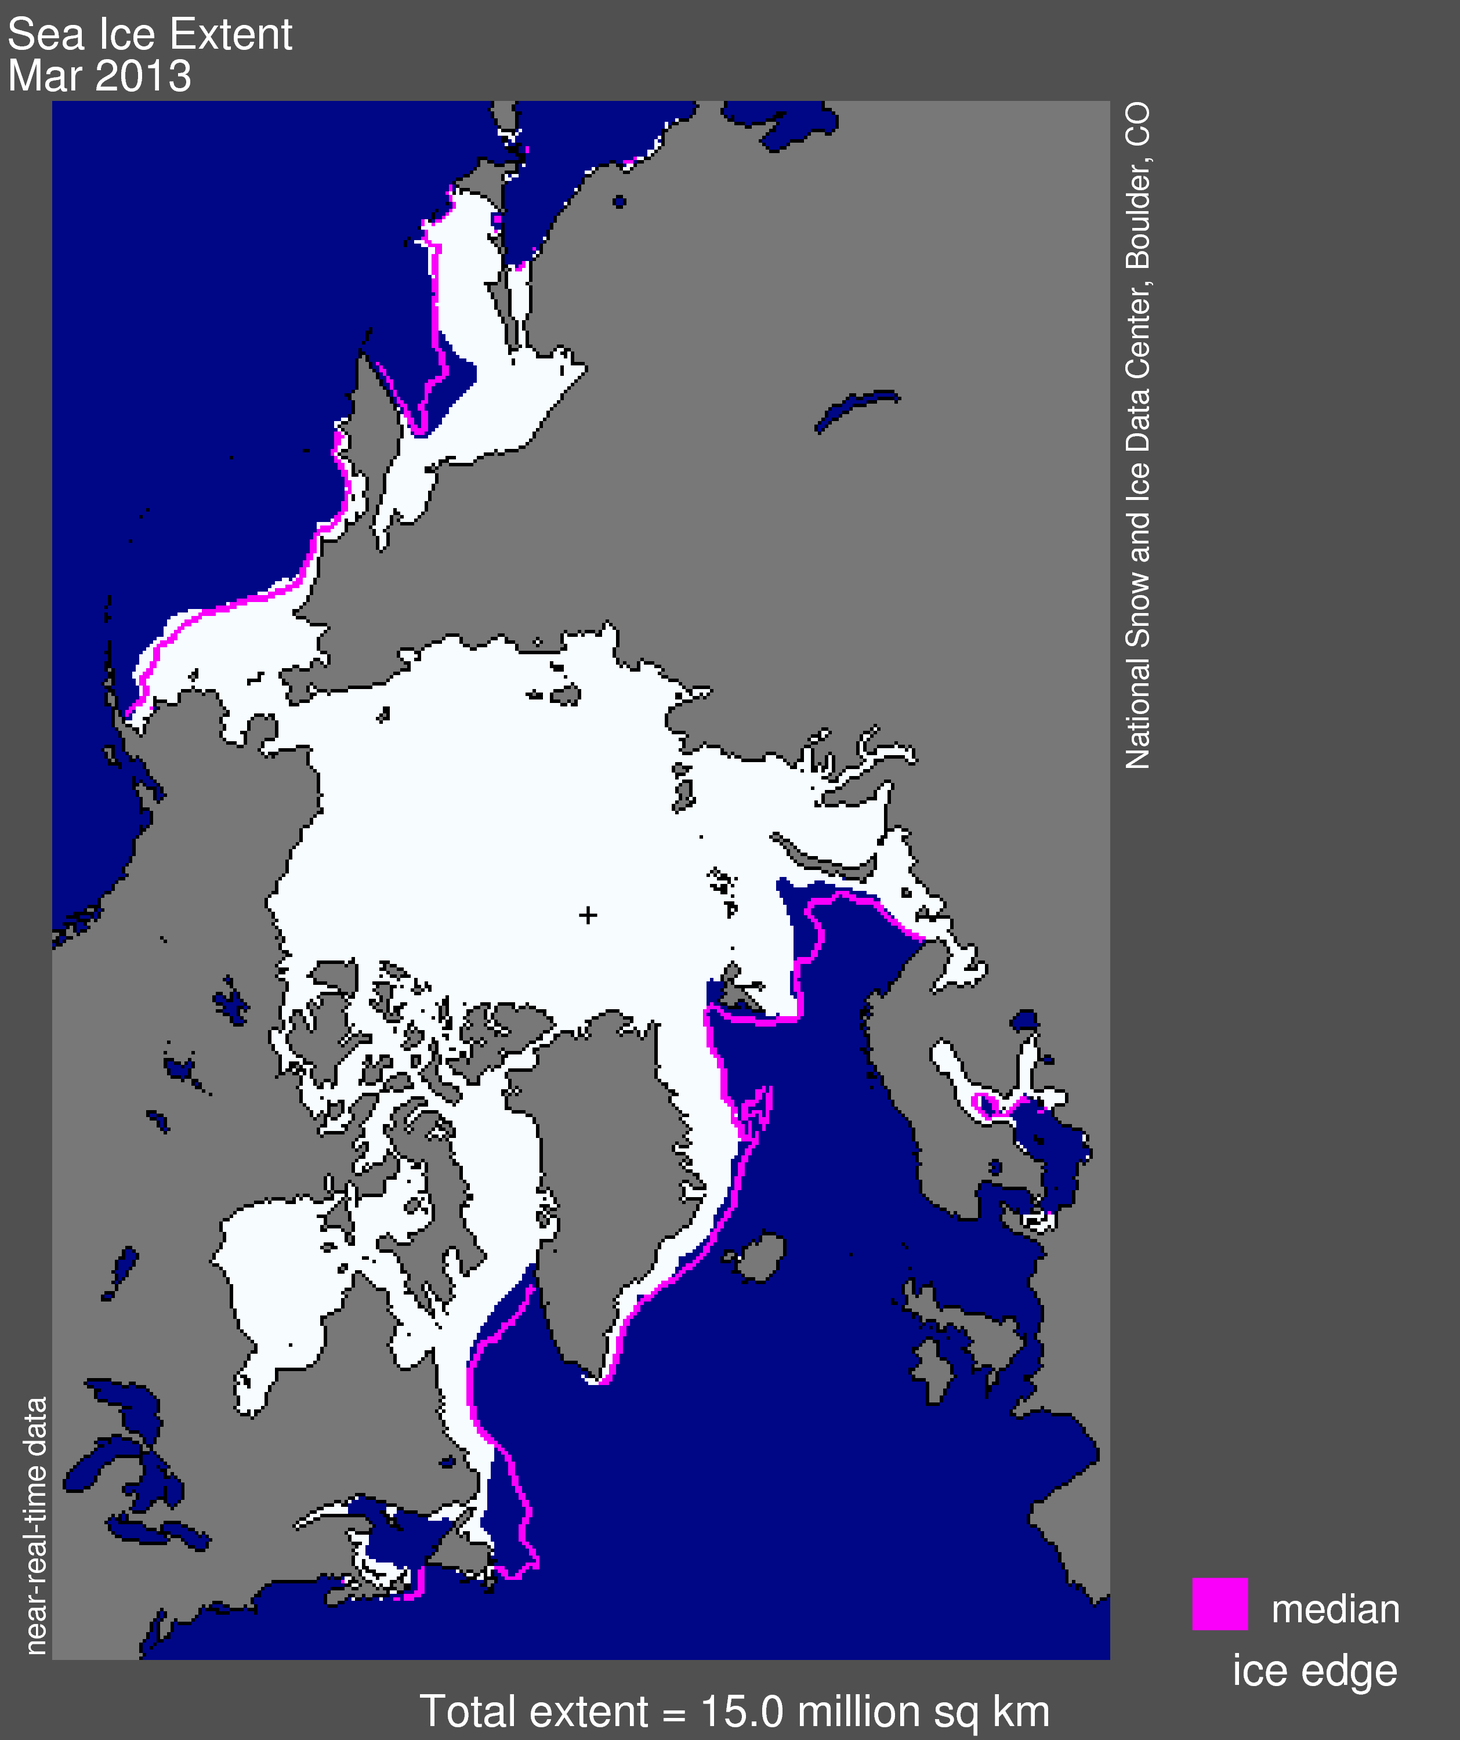 Arctic sea ice extent for March 2013